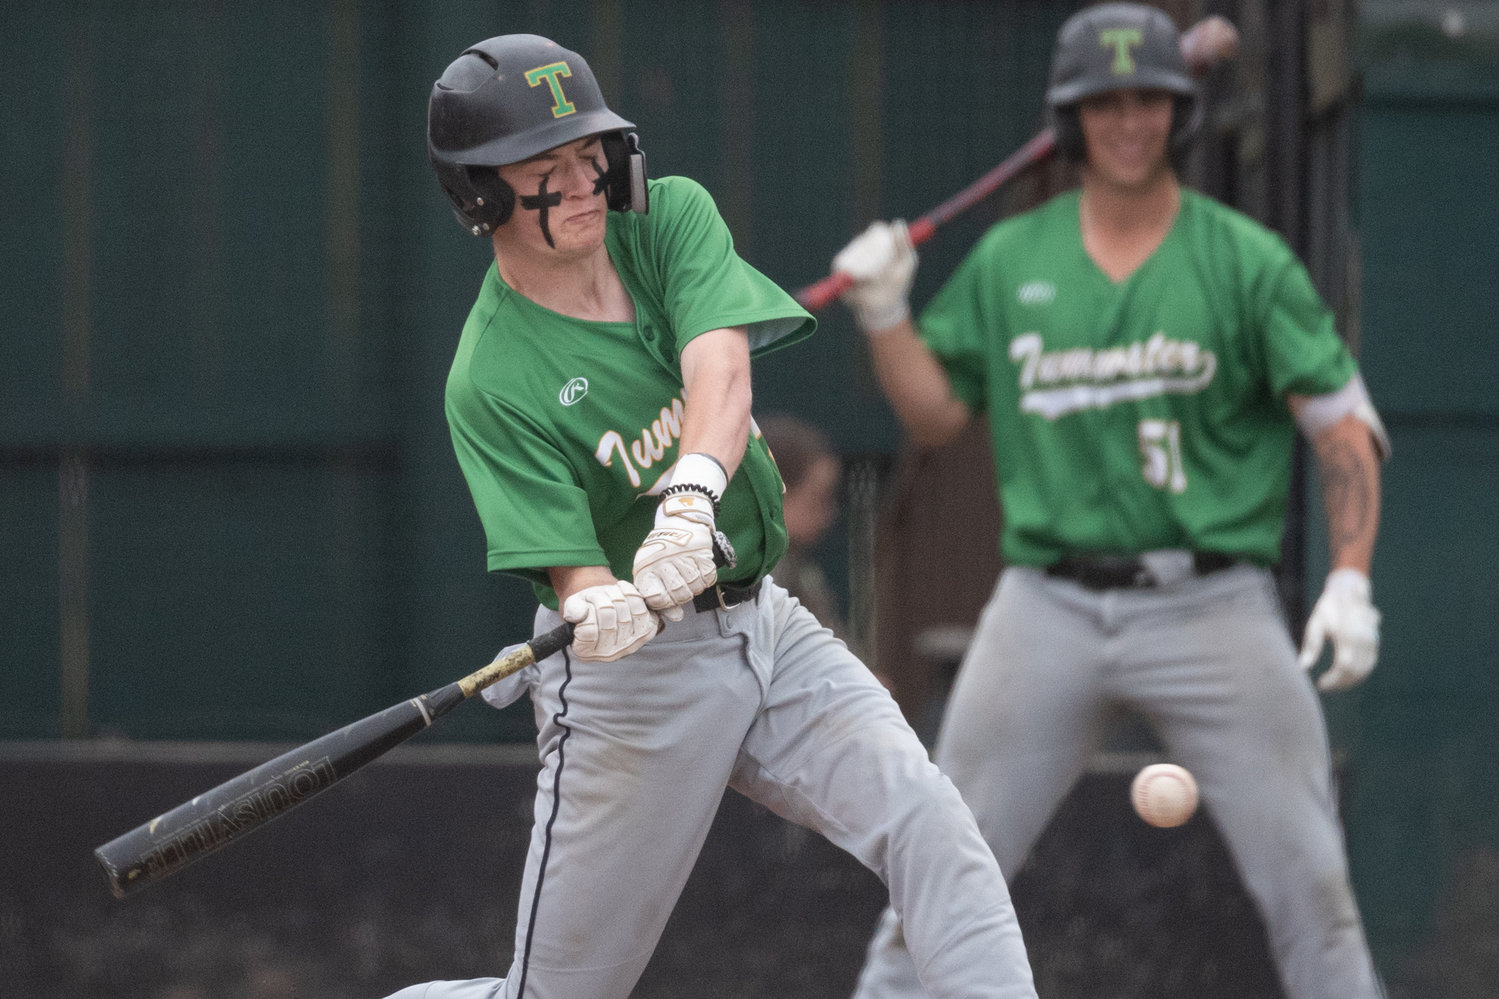 Tumwater's Brayden Oram makes contact with a pitch against Centralia May 2.